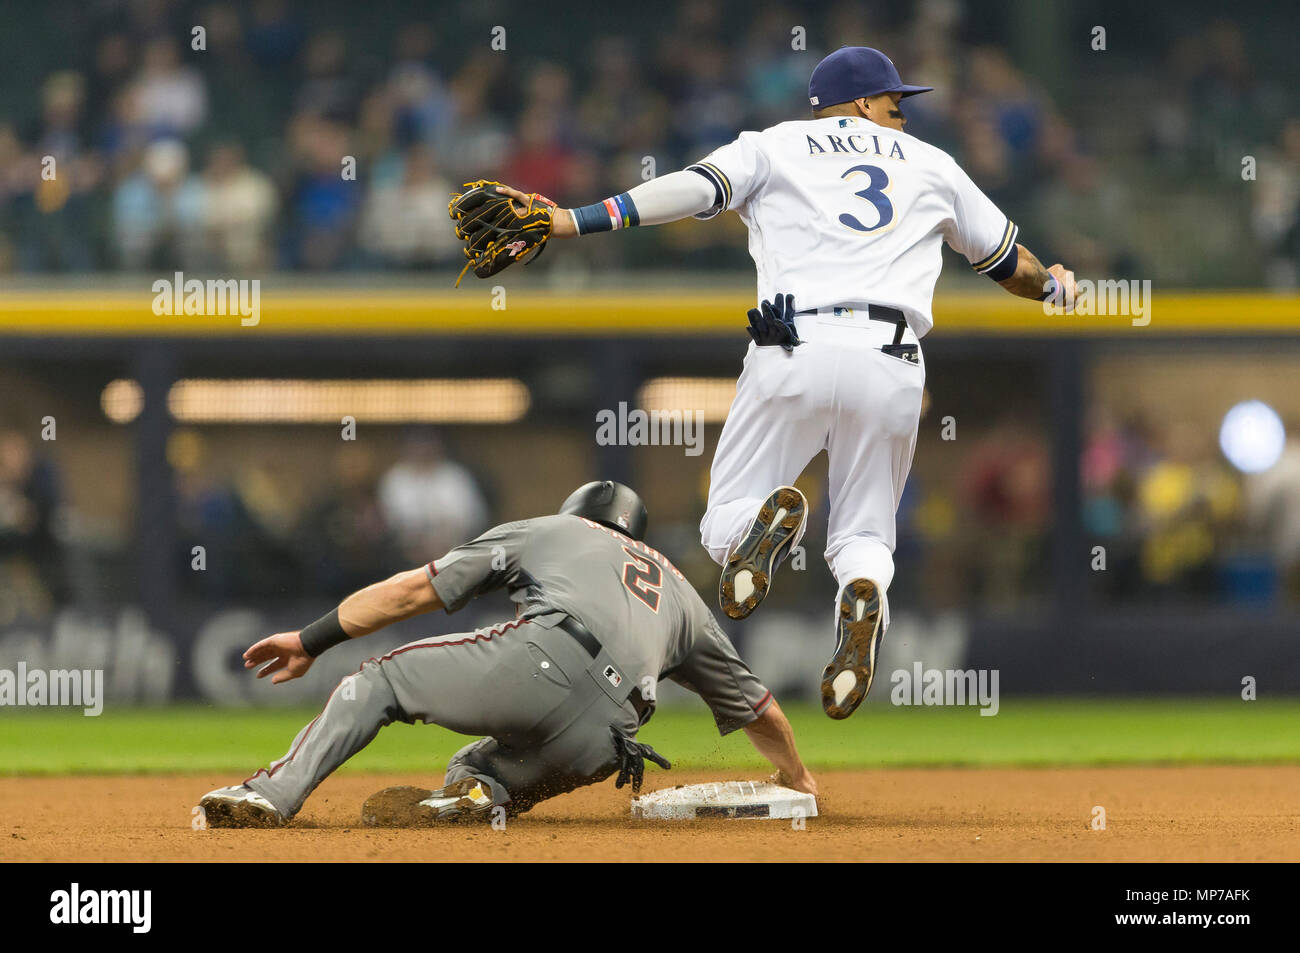 Milwaukee, WI, USA. 21st May, 2018. Arizona Diamondbacks catcher Jeff Mathis #2 attempts to break up a double play during the Major League Baseball game between the Milwaukee Brewers and the Arizona Diamondbacks at Miller Park in Milwaukee, WI. John Fisher/CSM/Alamy Live News Stock Photo